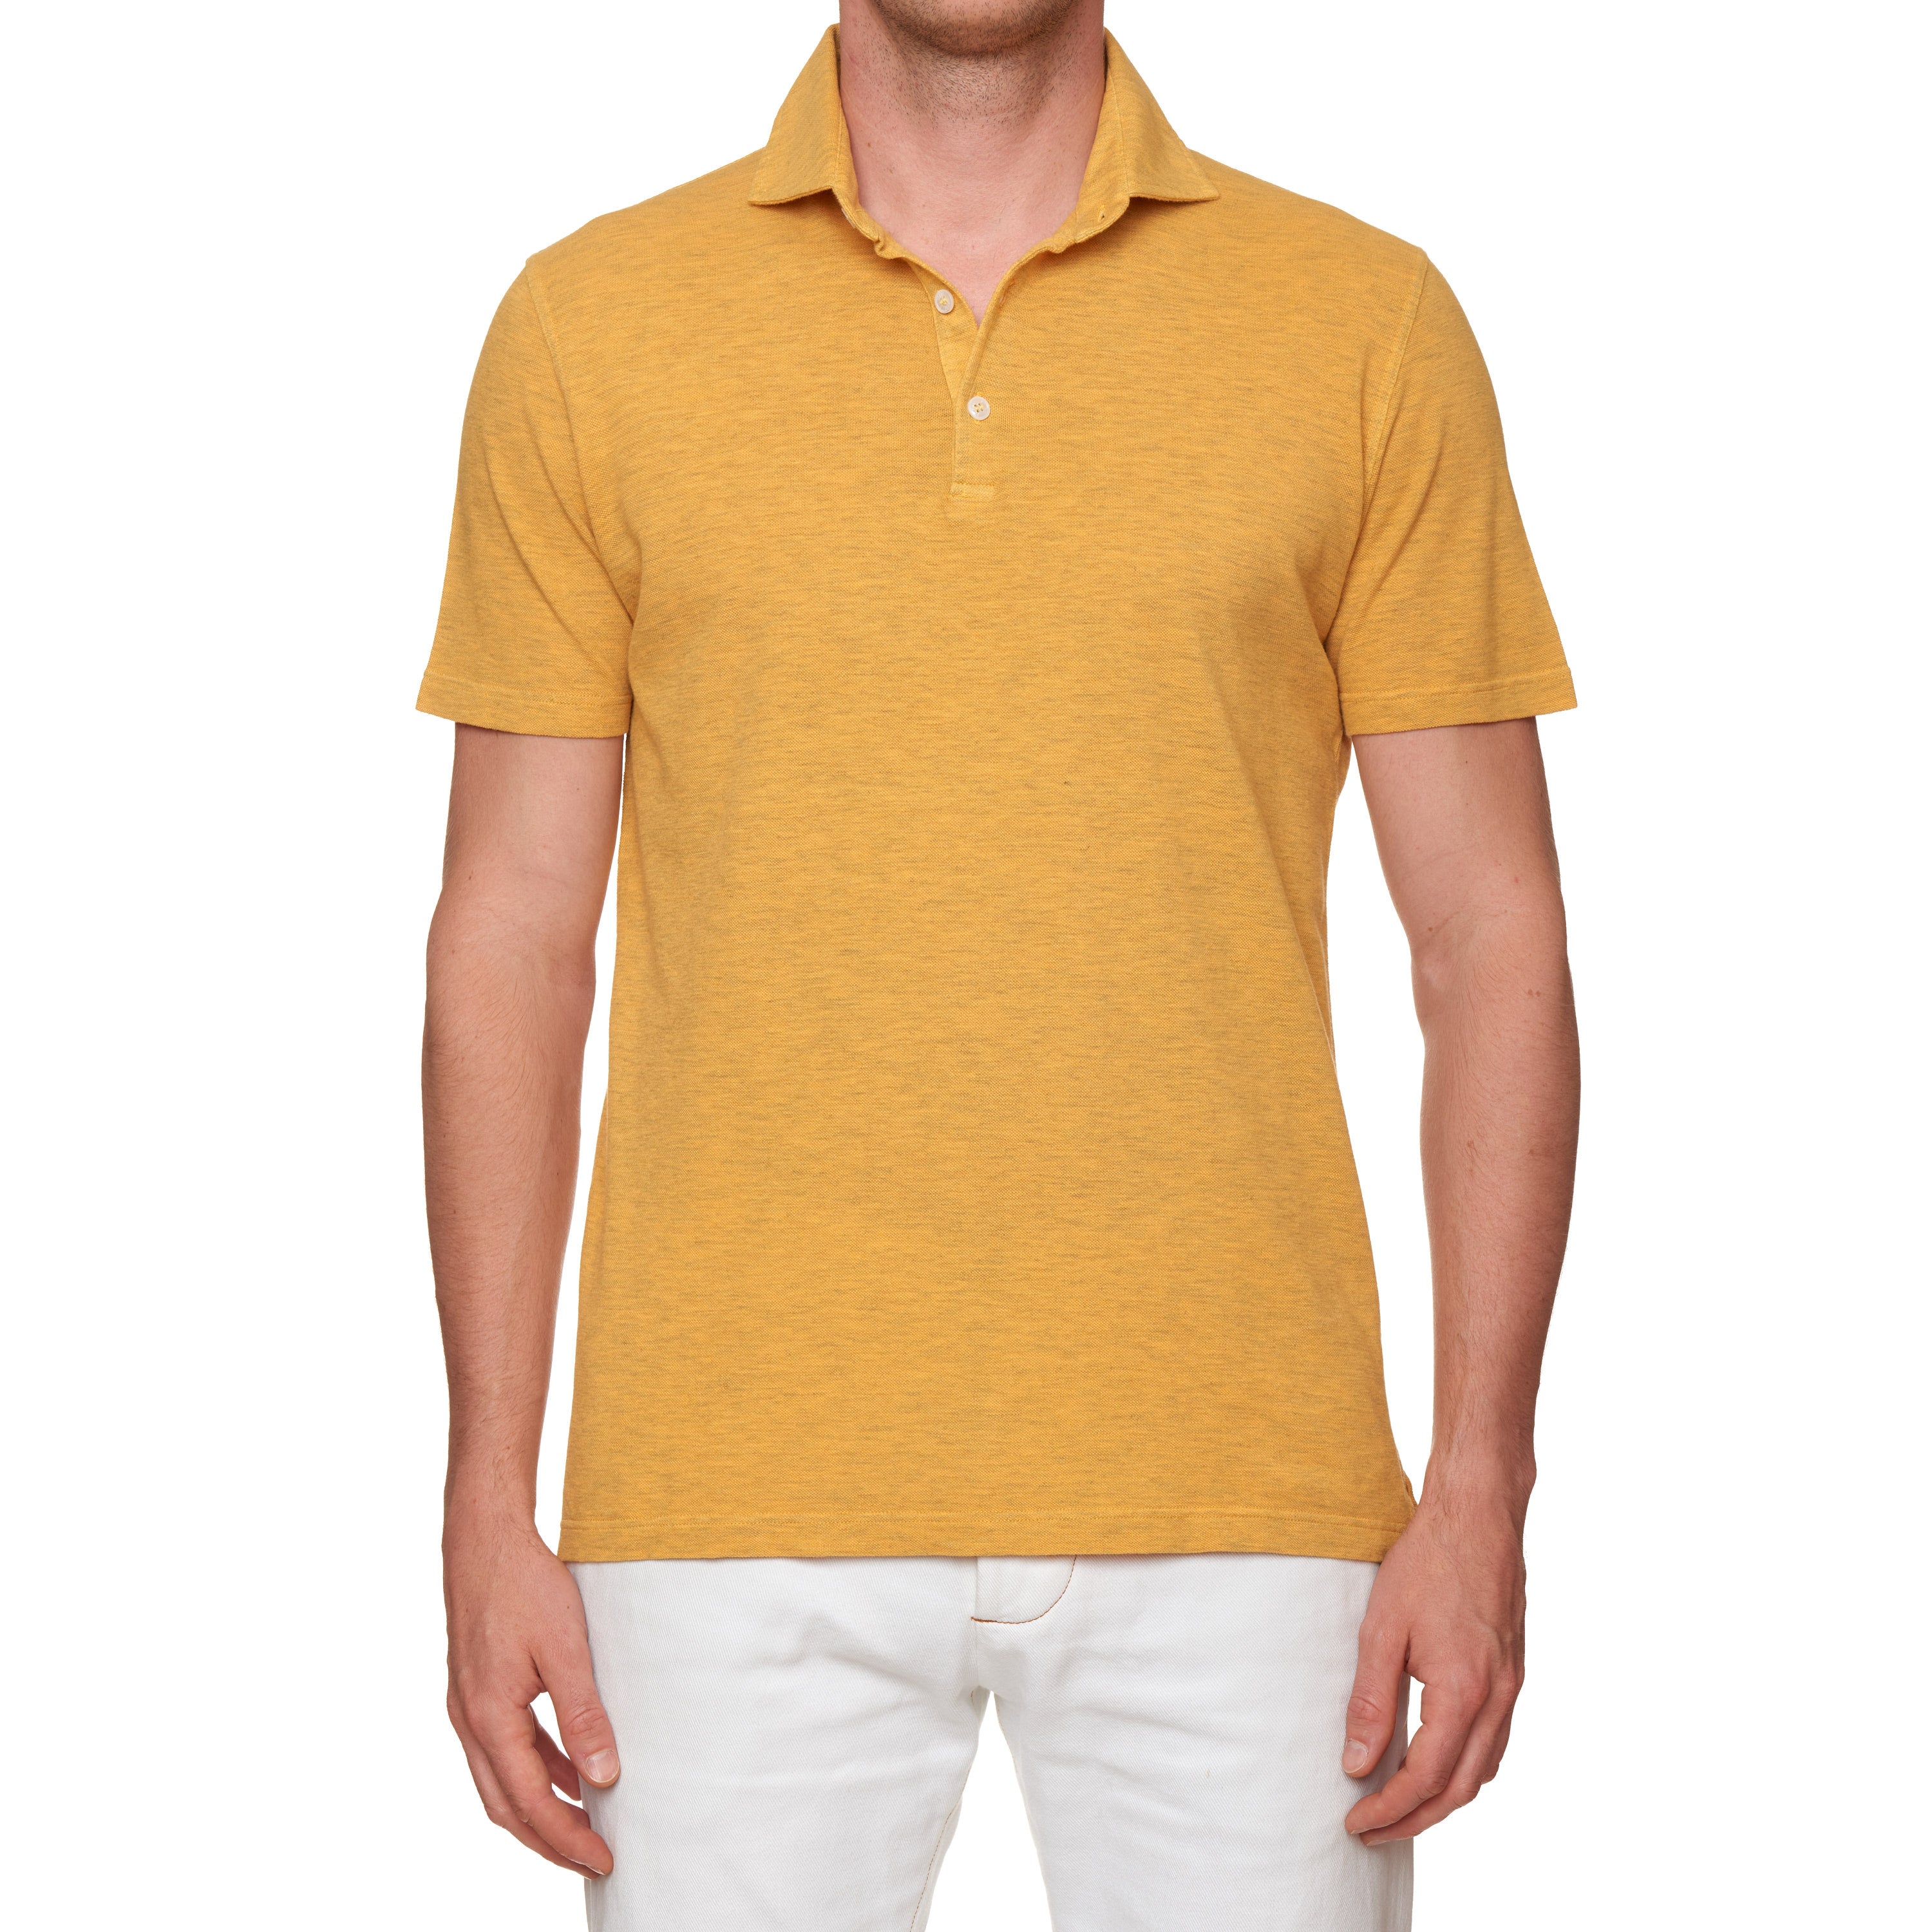 FEDELI "Tommy" Heather Yellow Cotton Short Sleeve Pique Polo Shirt 50 NEW US M FEDELI